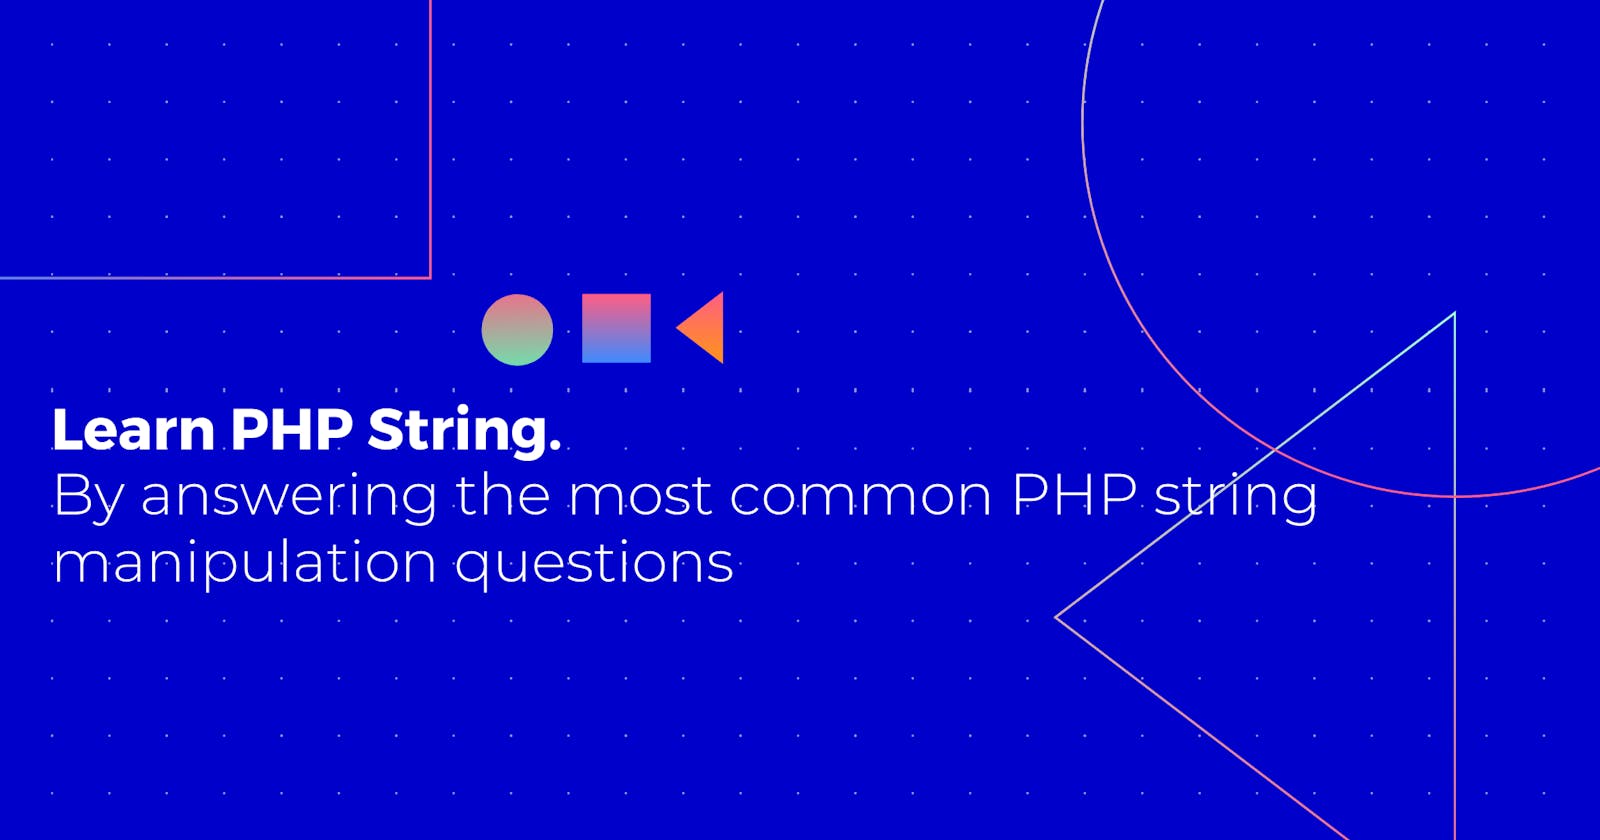 Most common PHP string manipulation questions